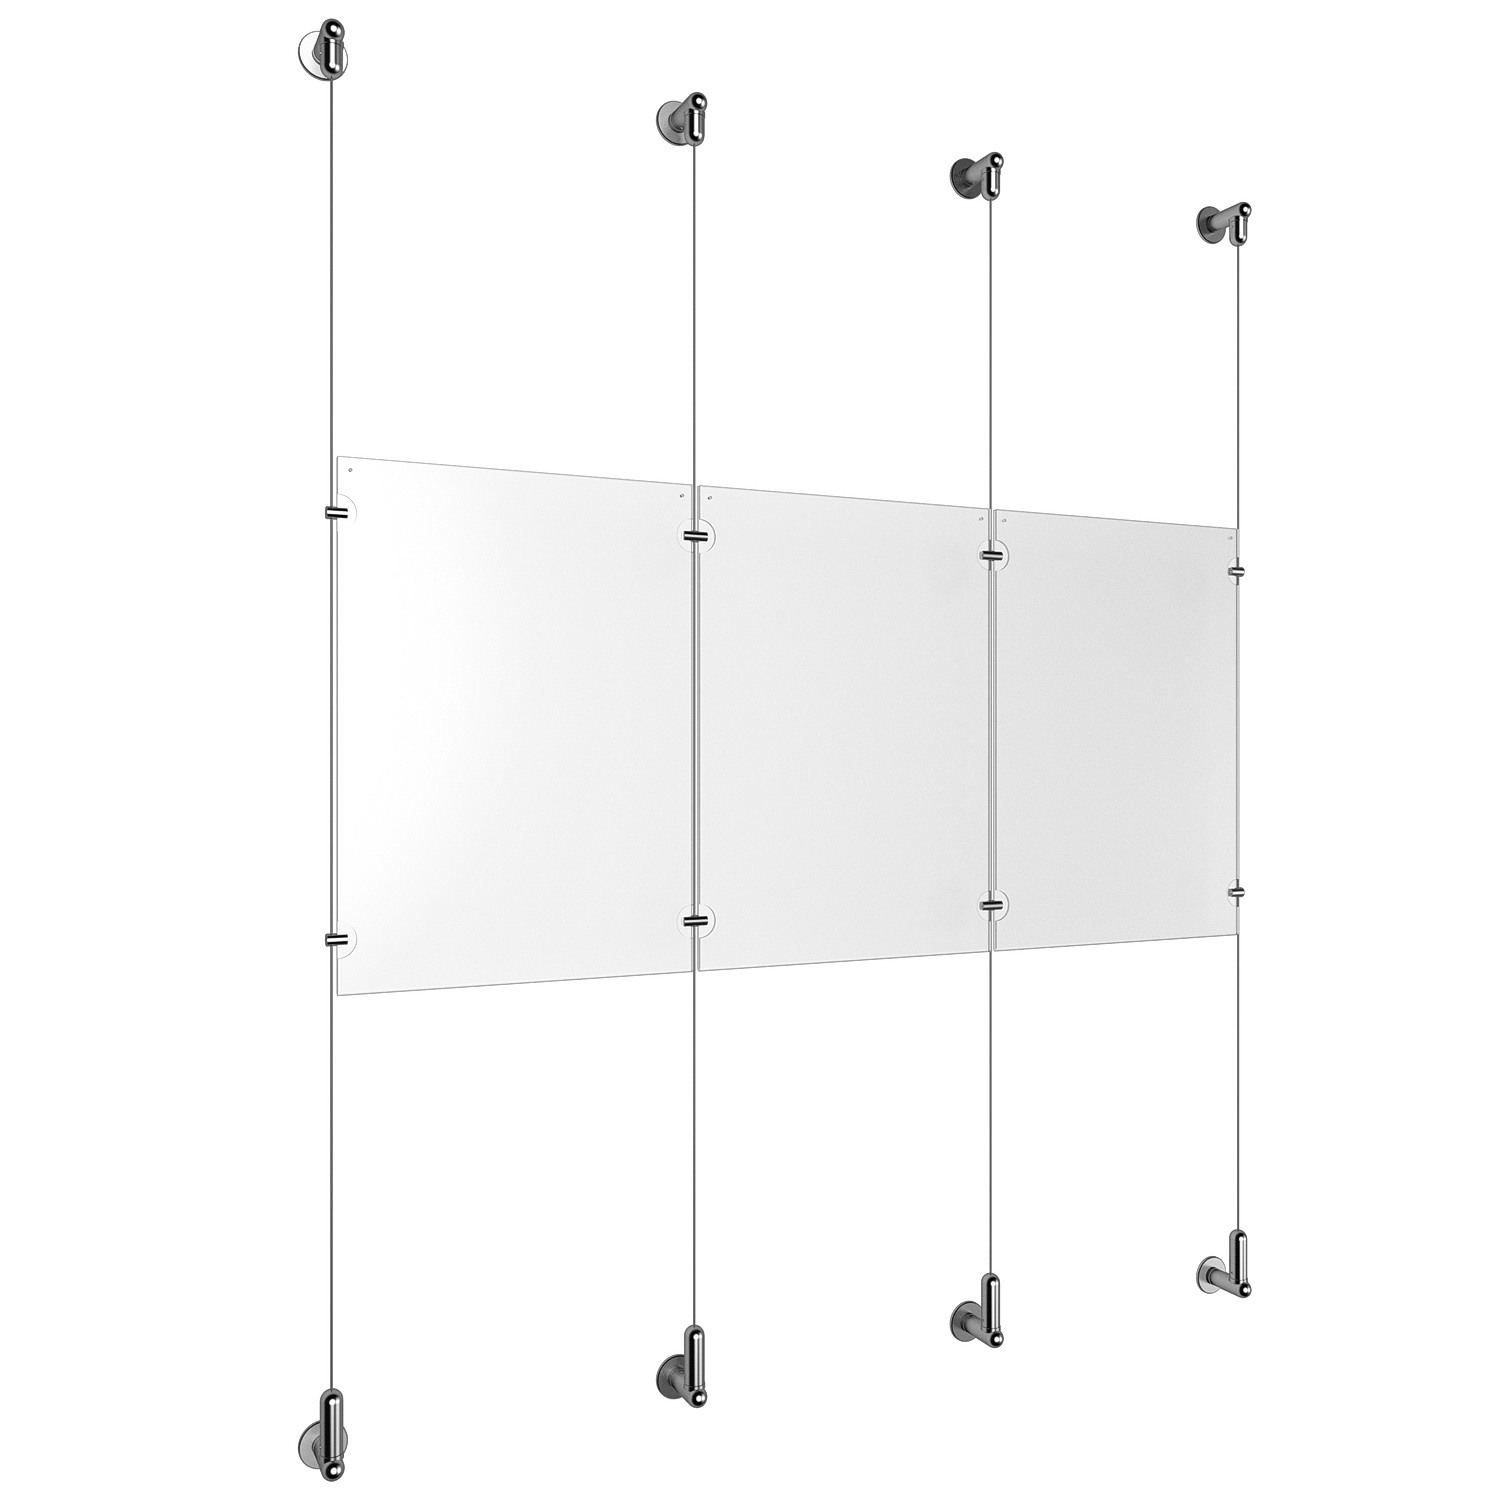 (3) 11'' Width x 17'' Height Clear Acrylic Frame & (4) Wall-to-Wall Aluminum Clear Anodized Cable Systems with (4) Single-Sided Panel Grippers (4) Double-Sided Panel Grippers